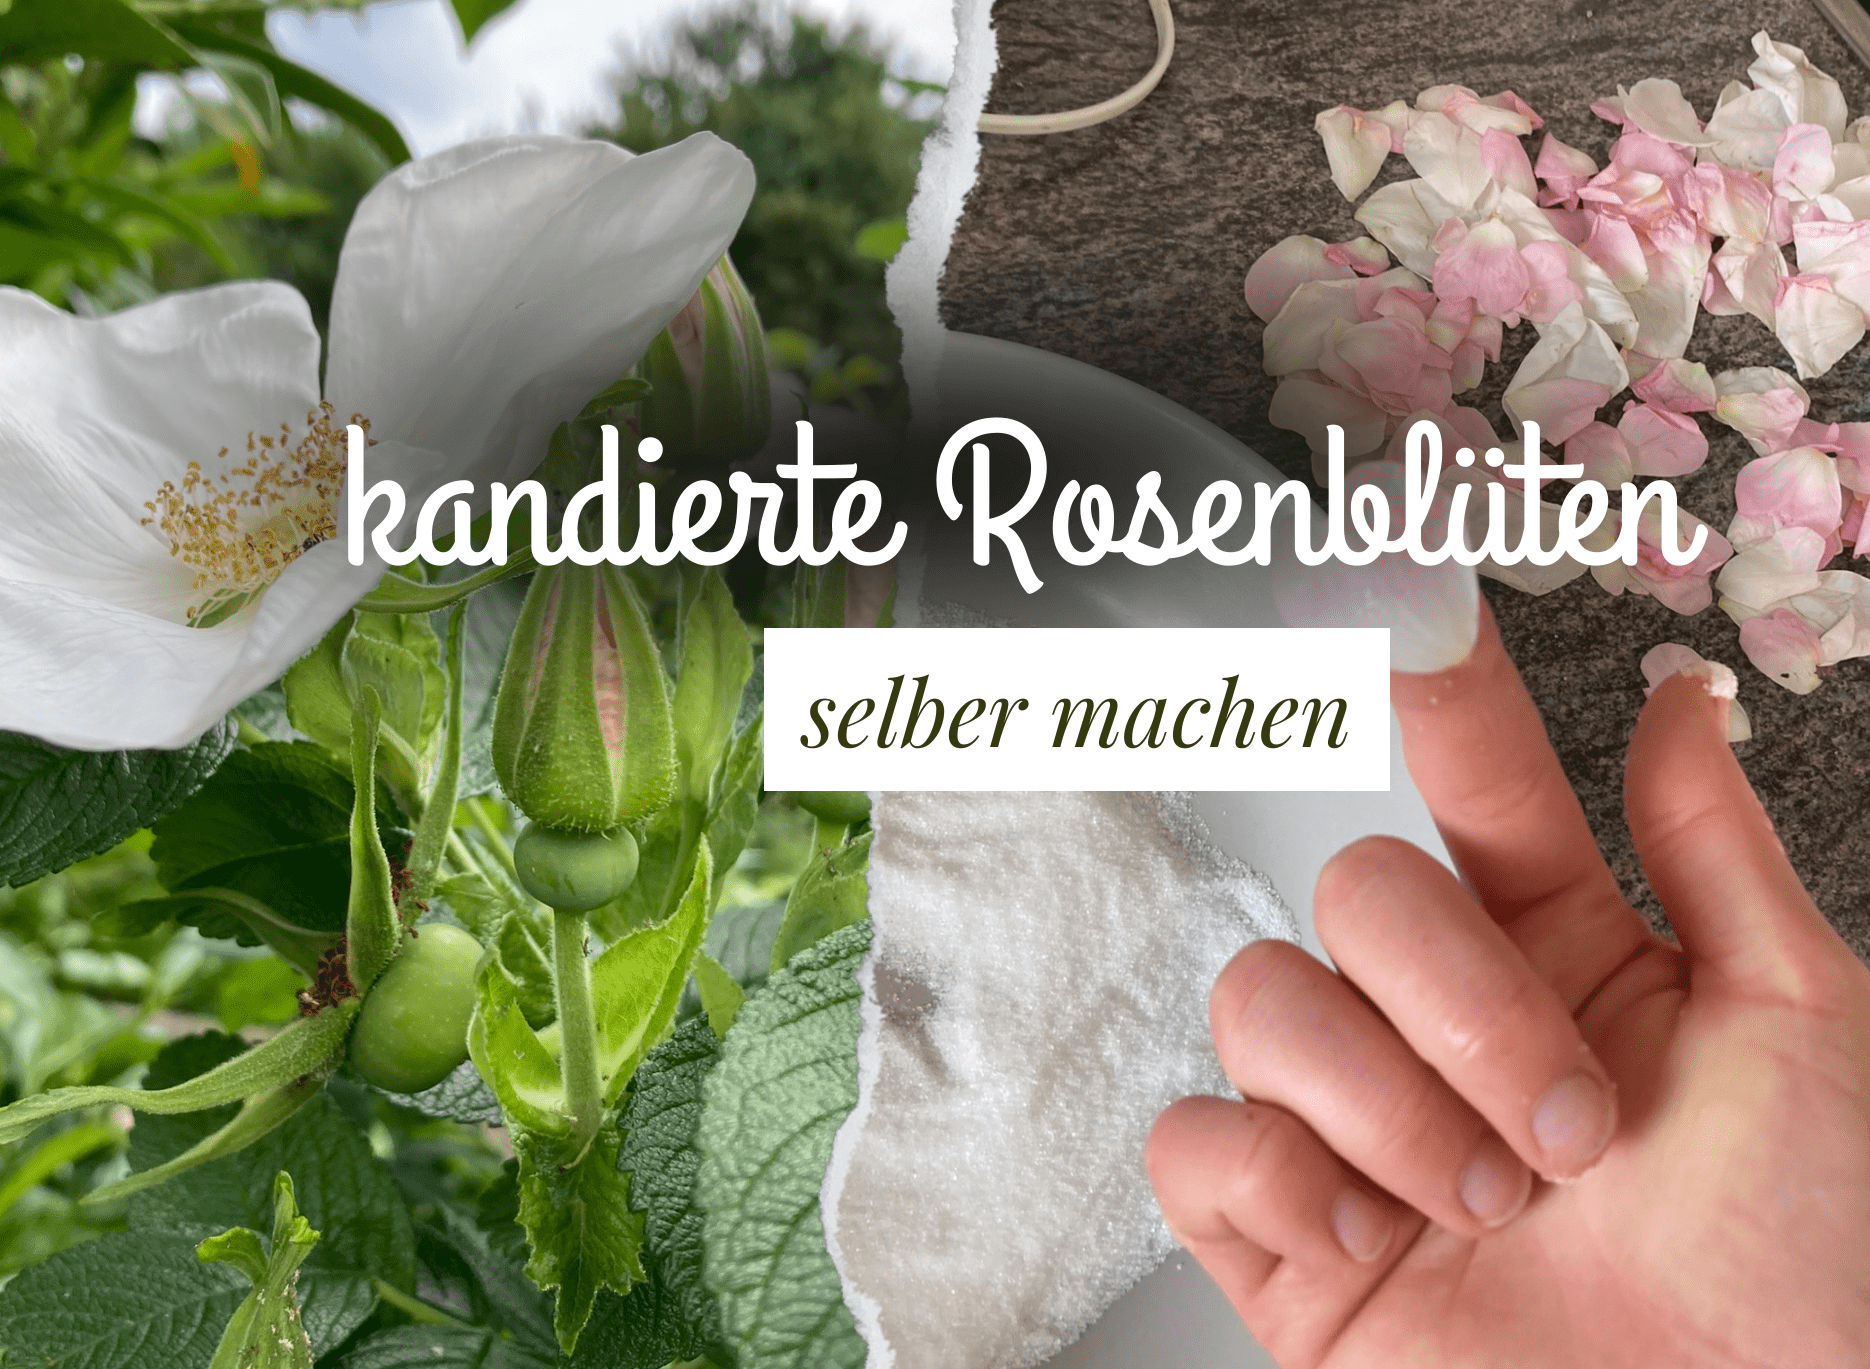 You are currently viewing Kandierte Rosenblüten